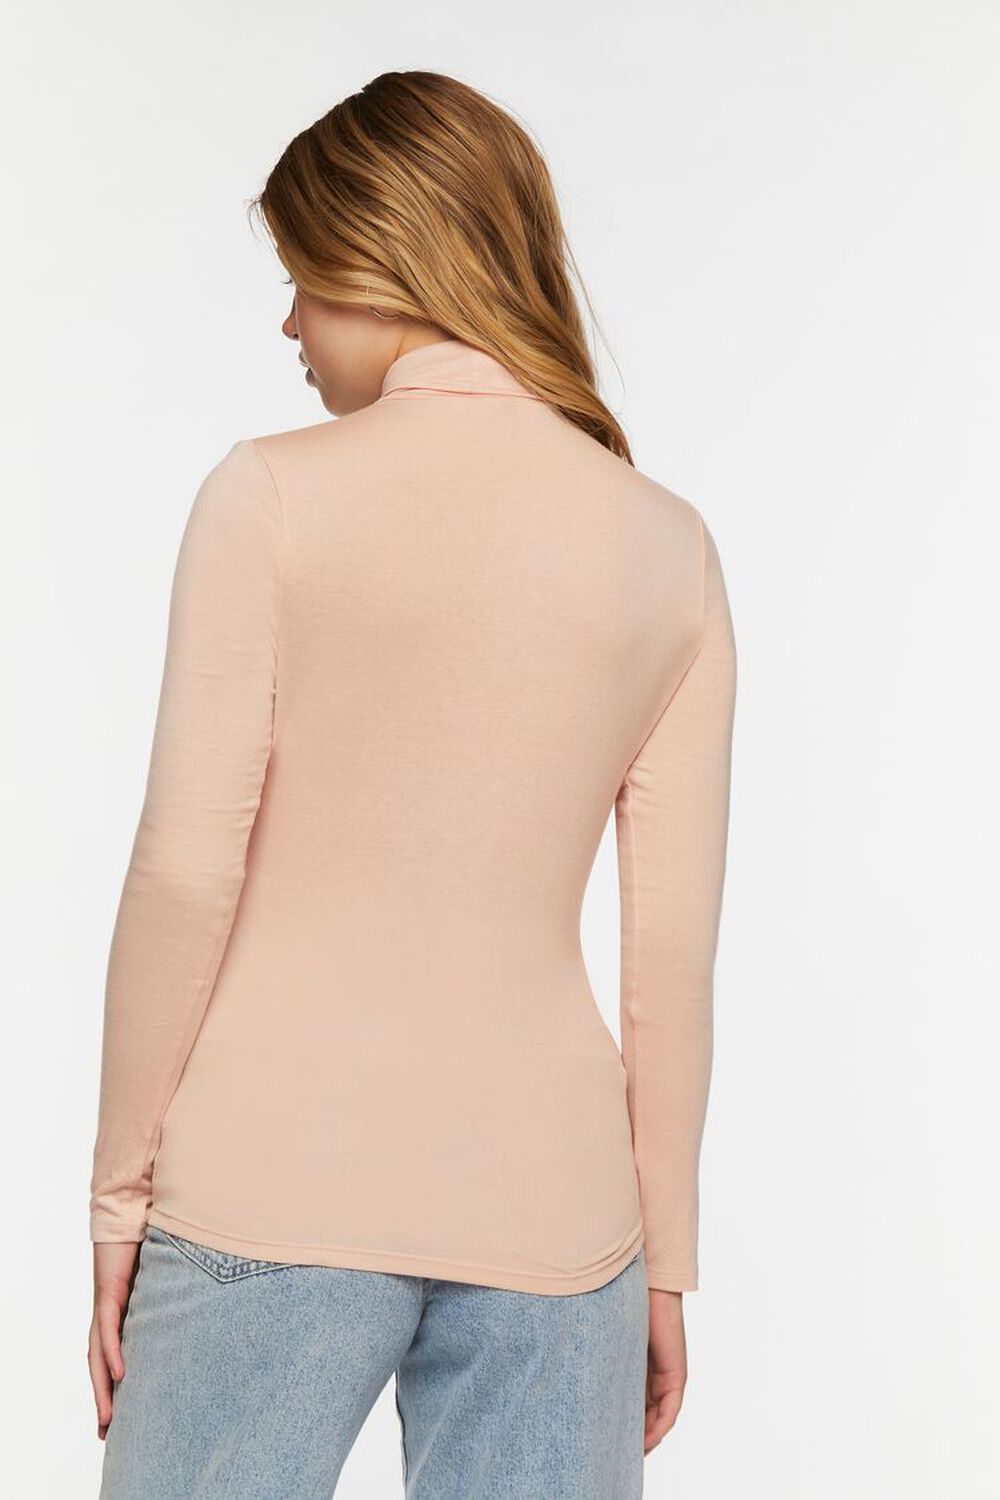 PINK Fitted Long-Sleeve Turtleneck Top, image 3